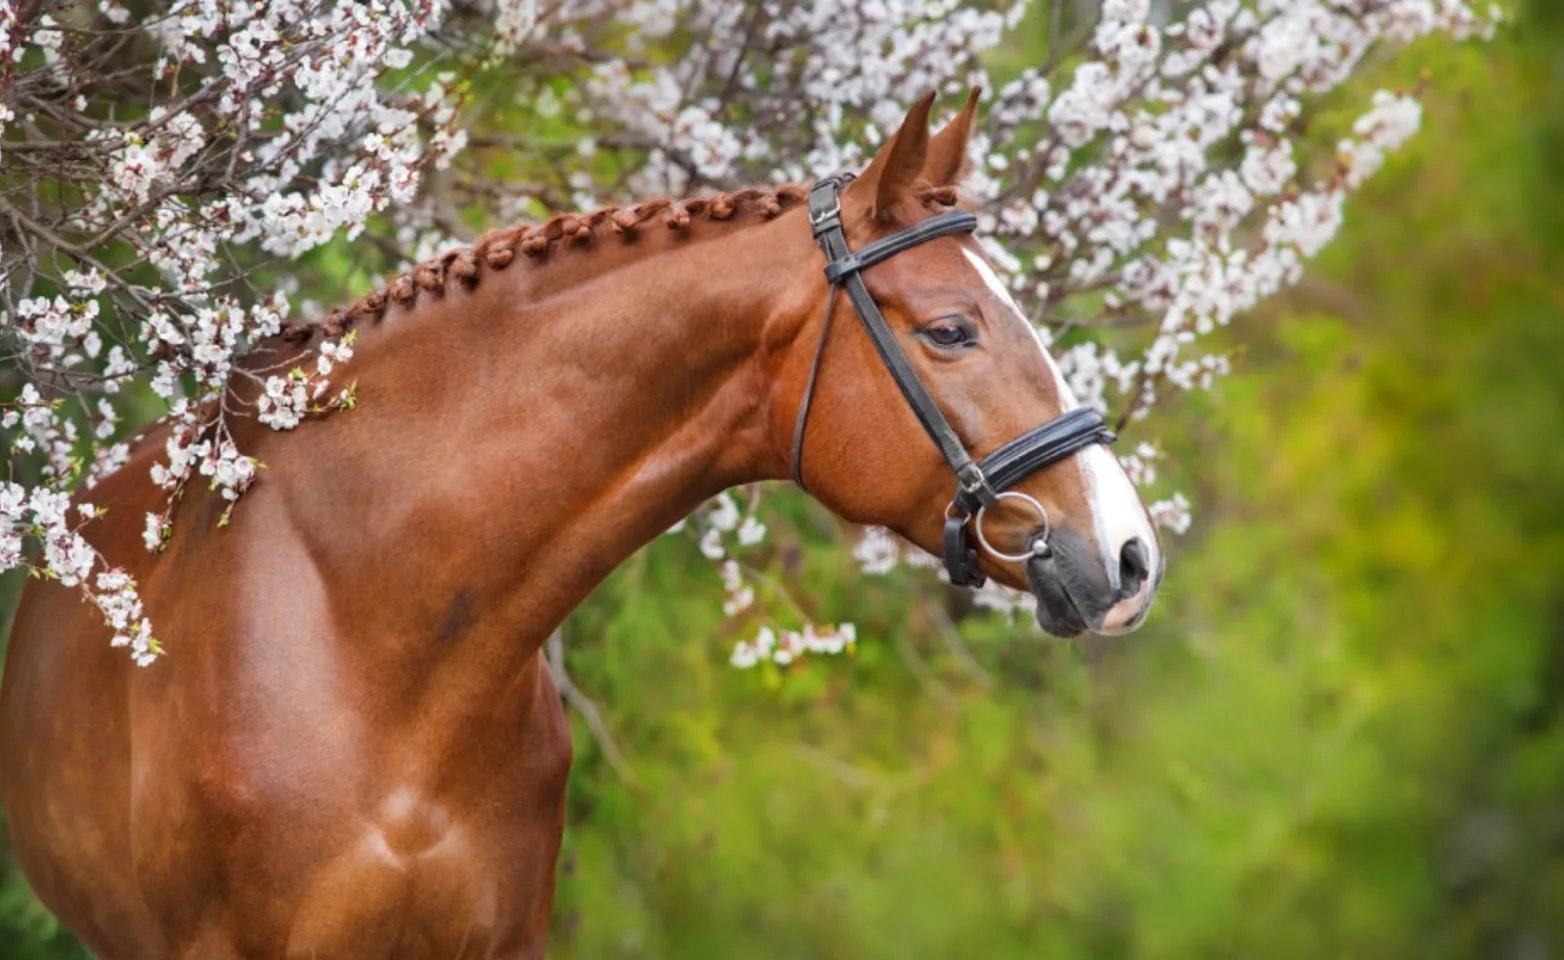 Brown horse standing amongst white and pink flowery trees.